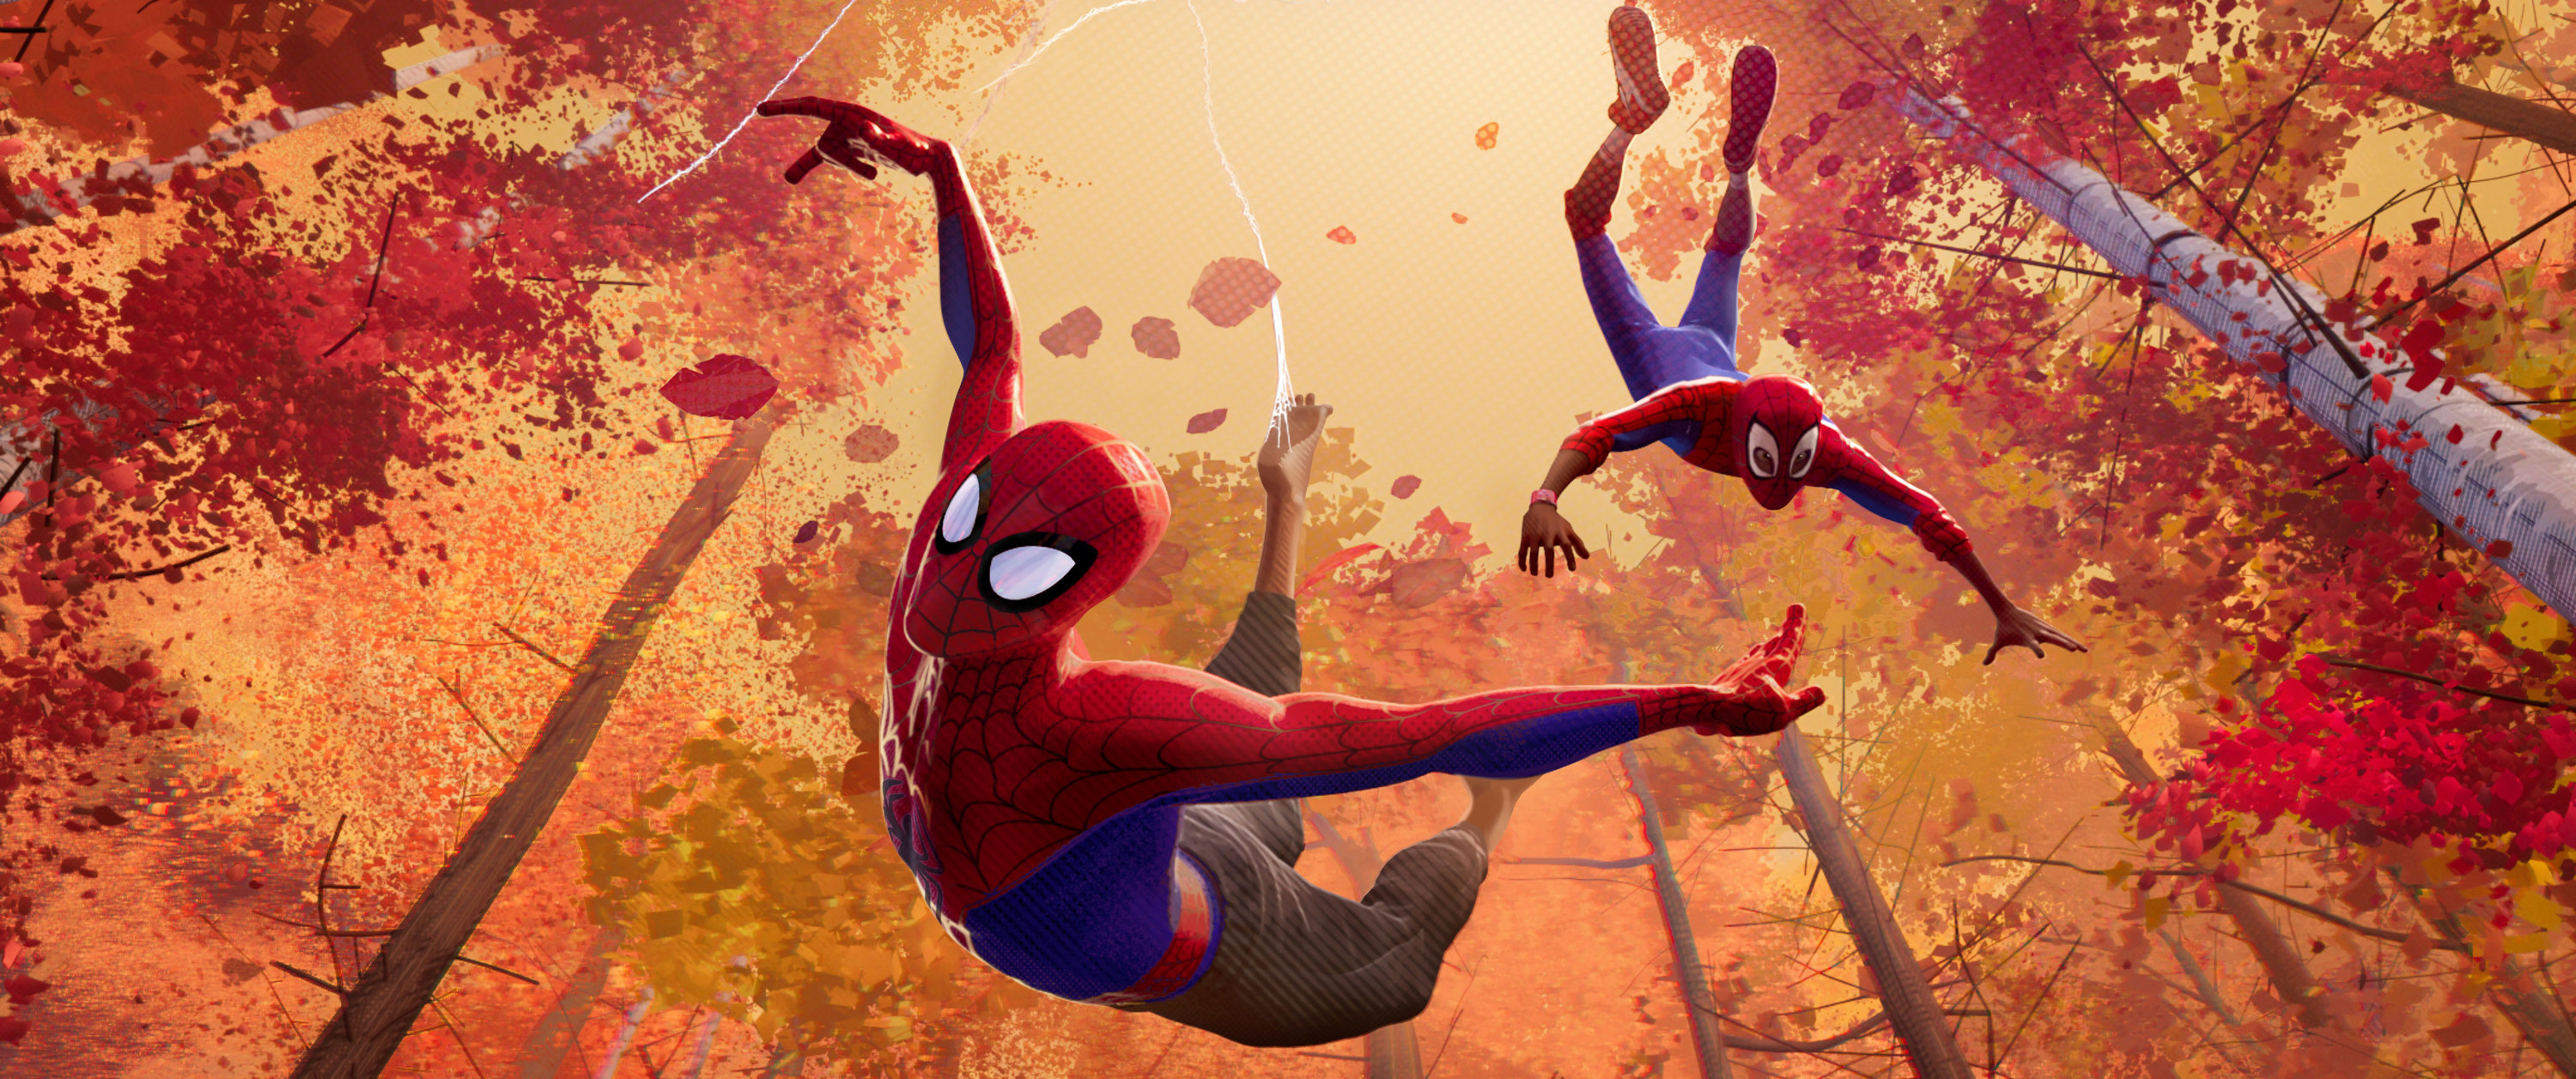 Two Spider-Men flying through the forest